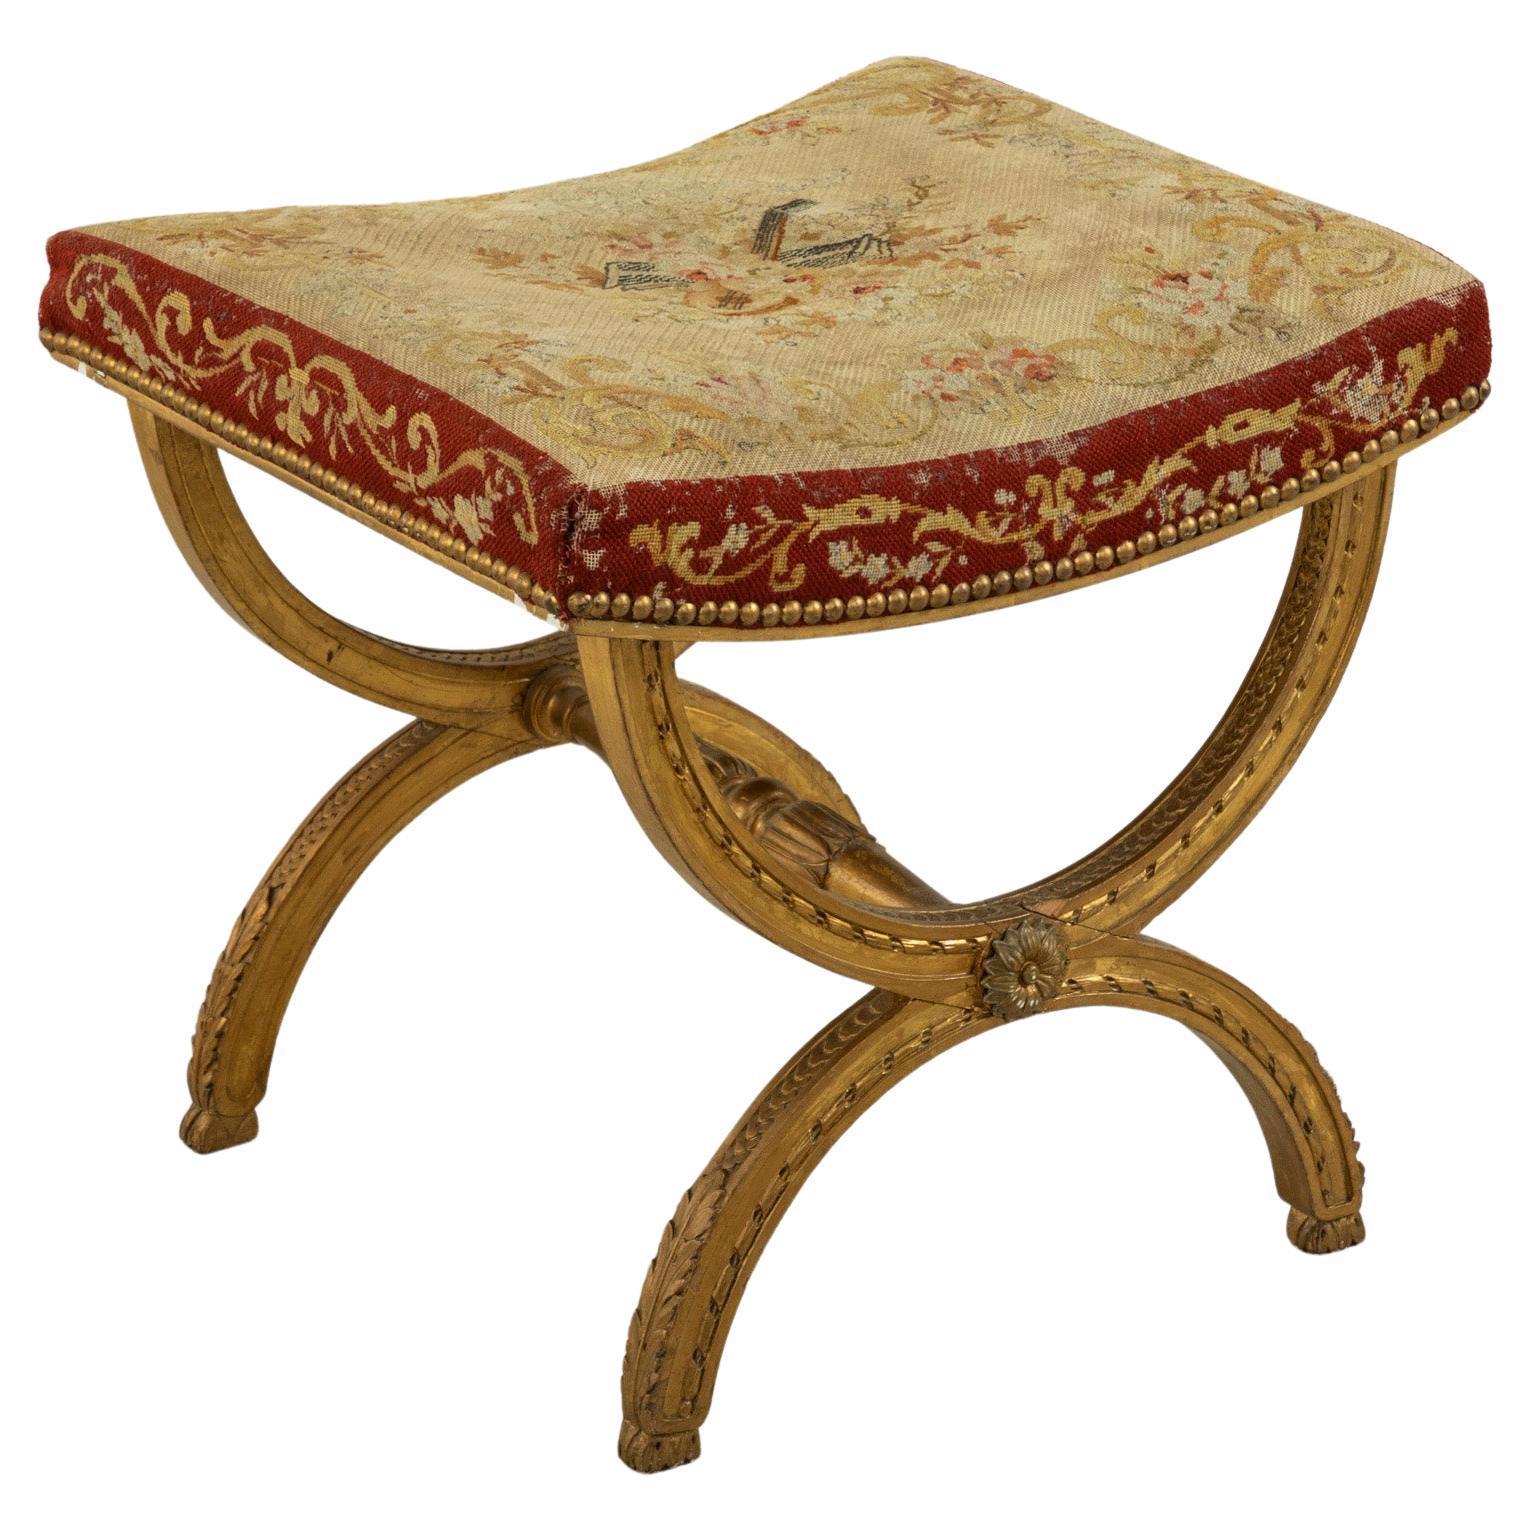 19th Century French Louis XIV Giltwood Bench, Vanity Stool with Needlepoint Seat